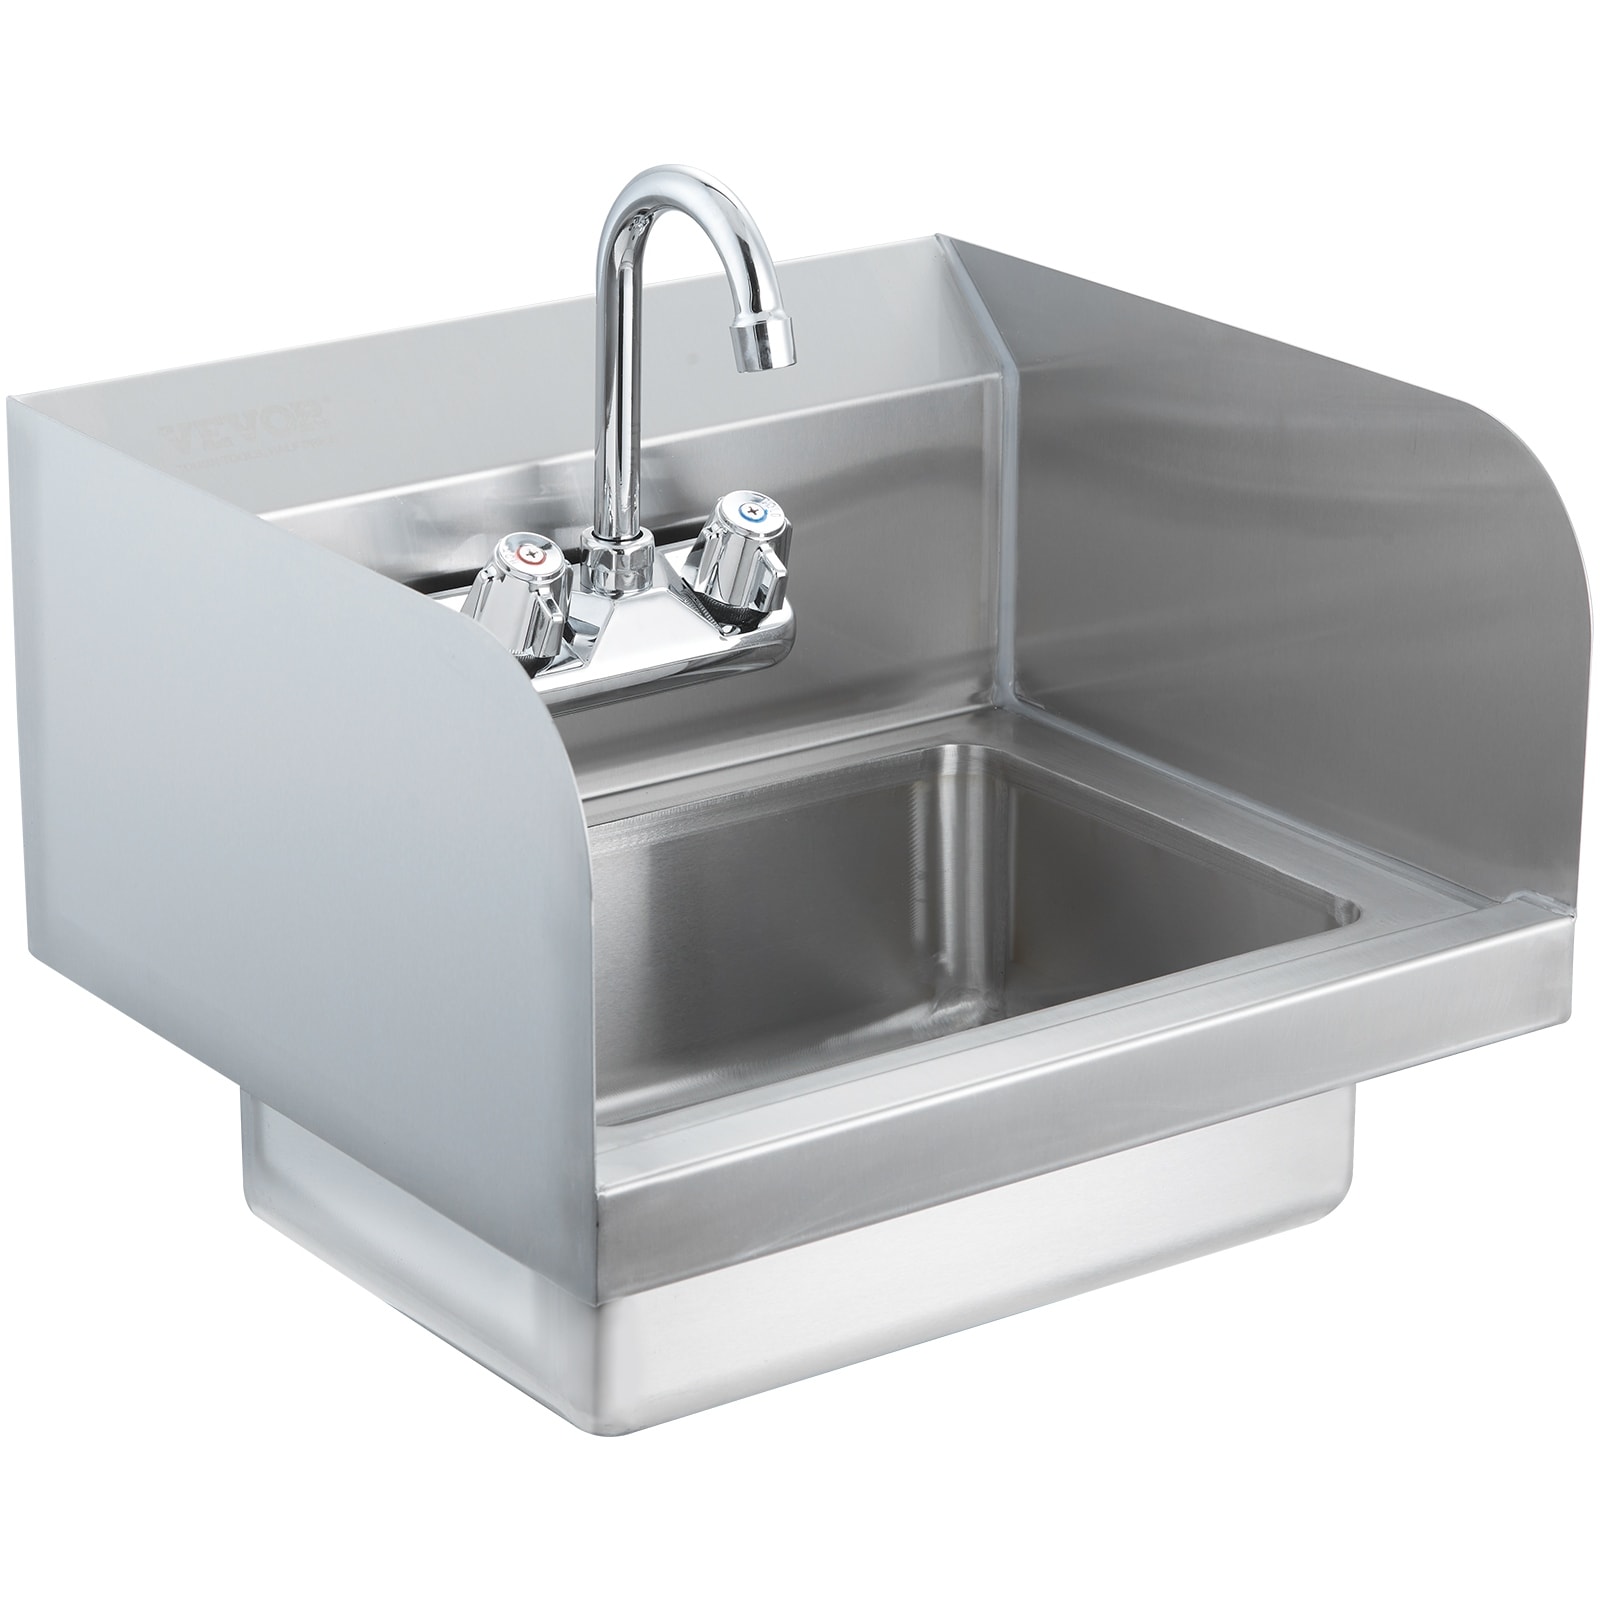 TRINITY Stainless Steel Utility Sink w/ Faucet, NSF Certified